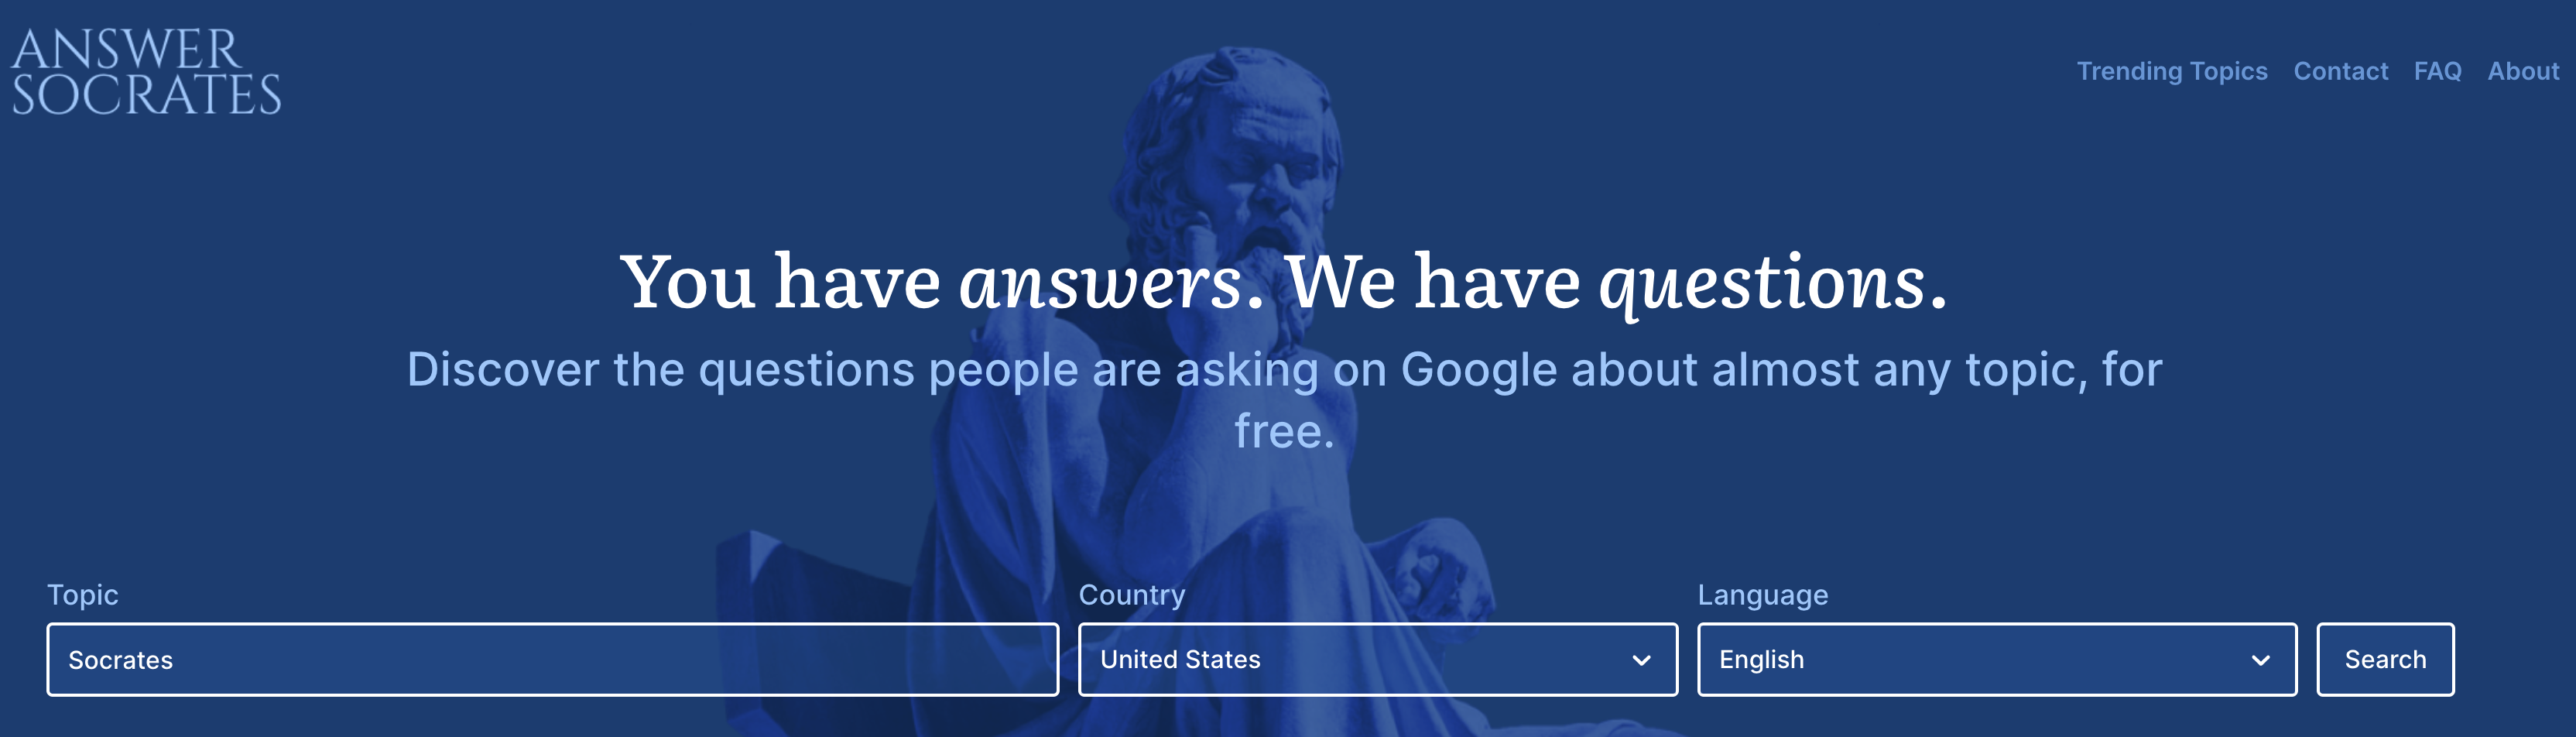 Answer Socrates Keyword Research Tool